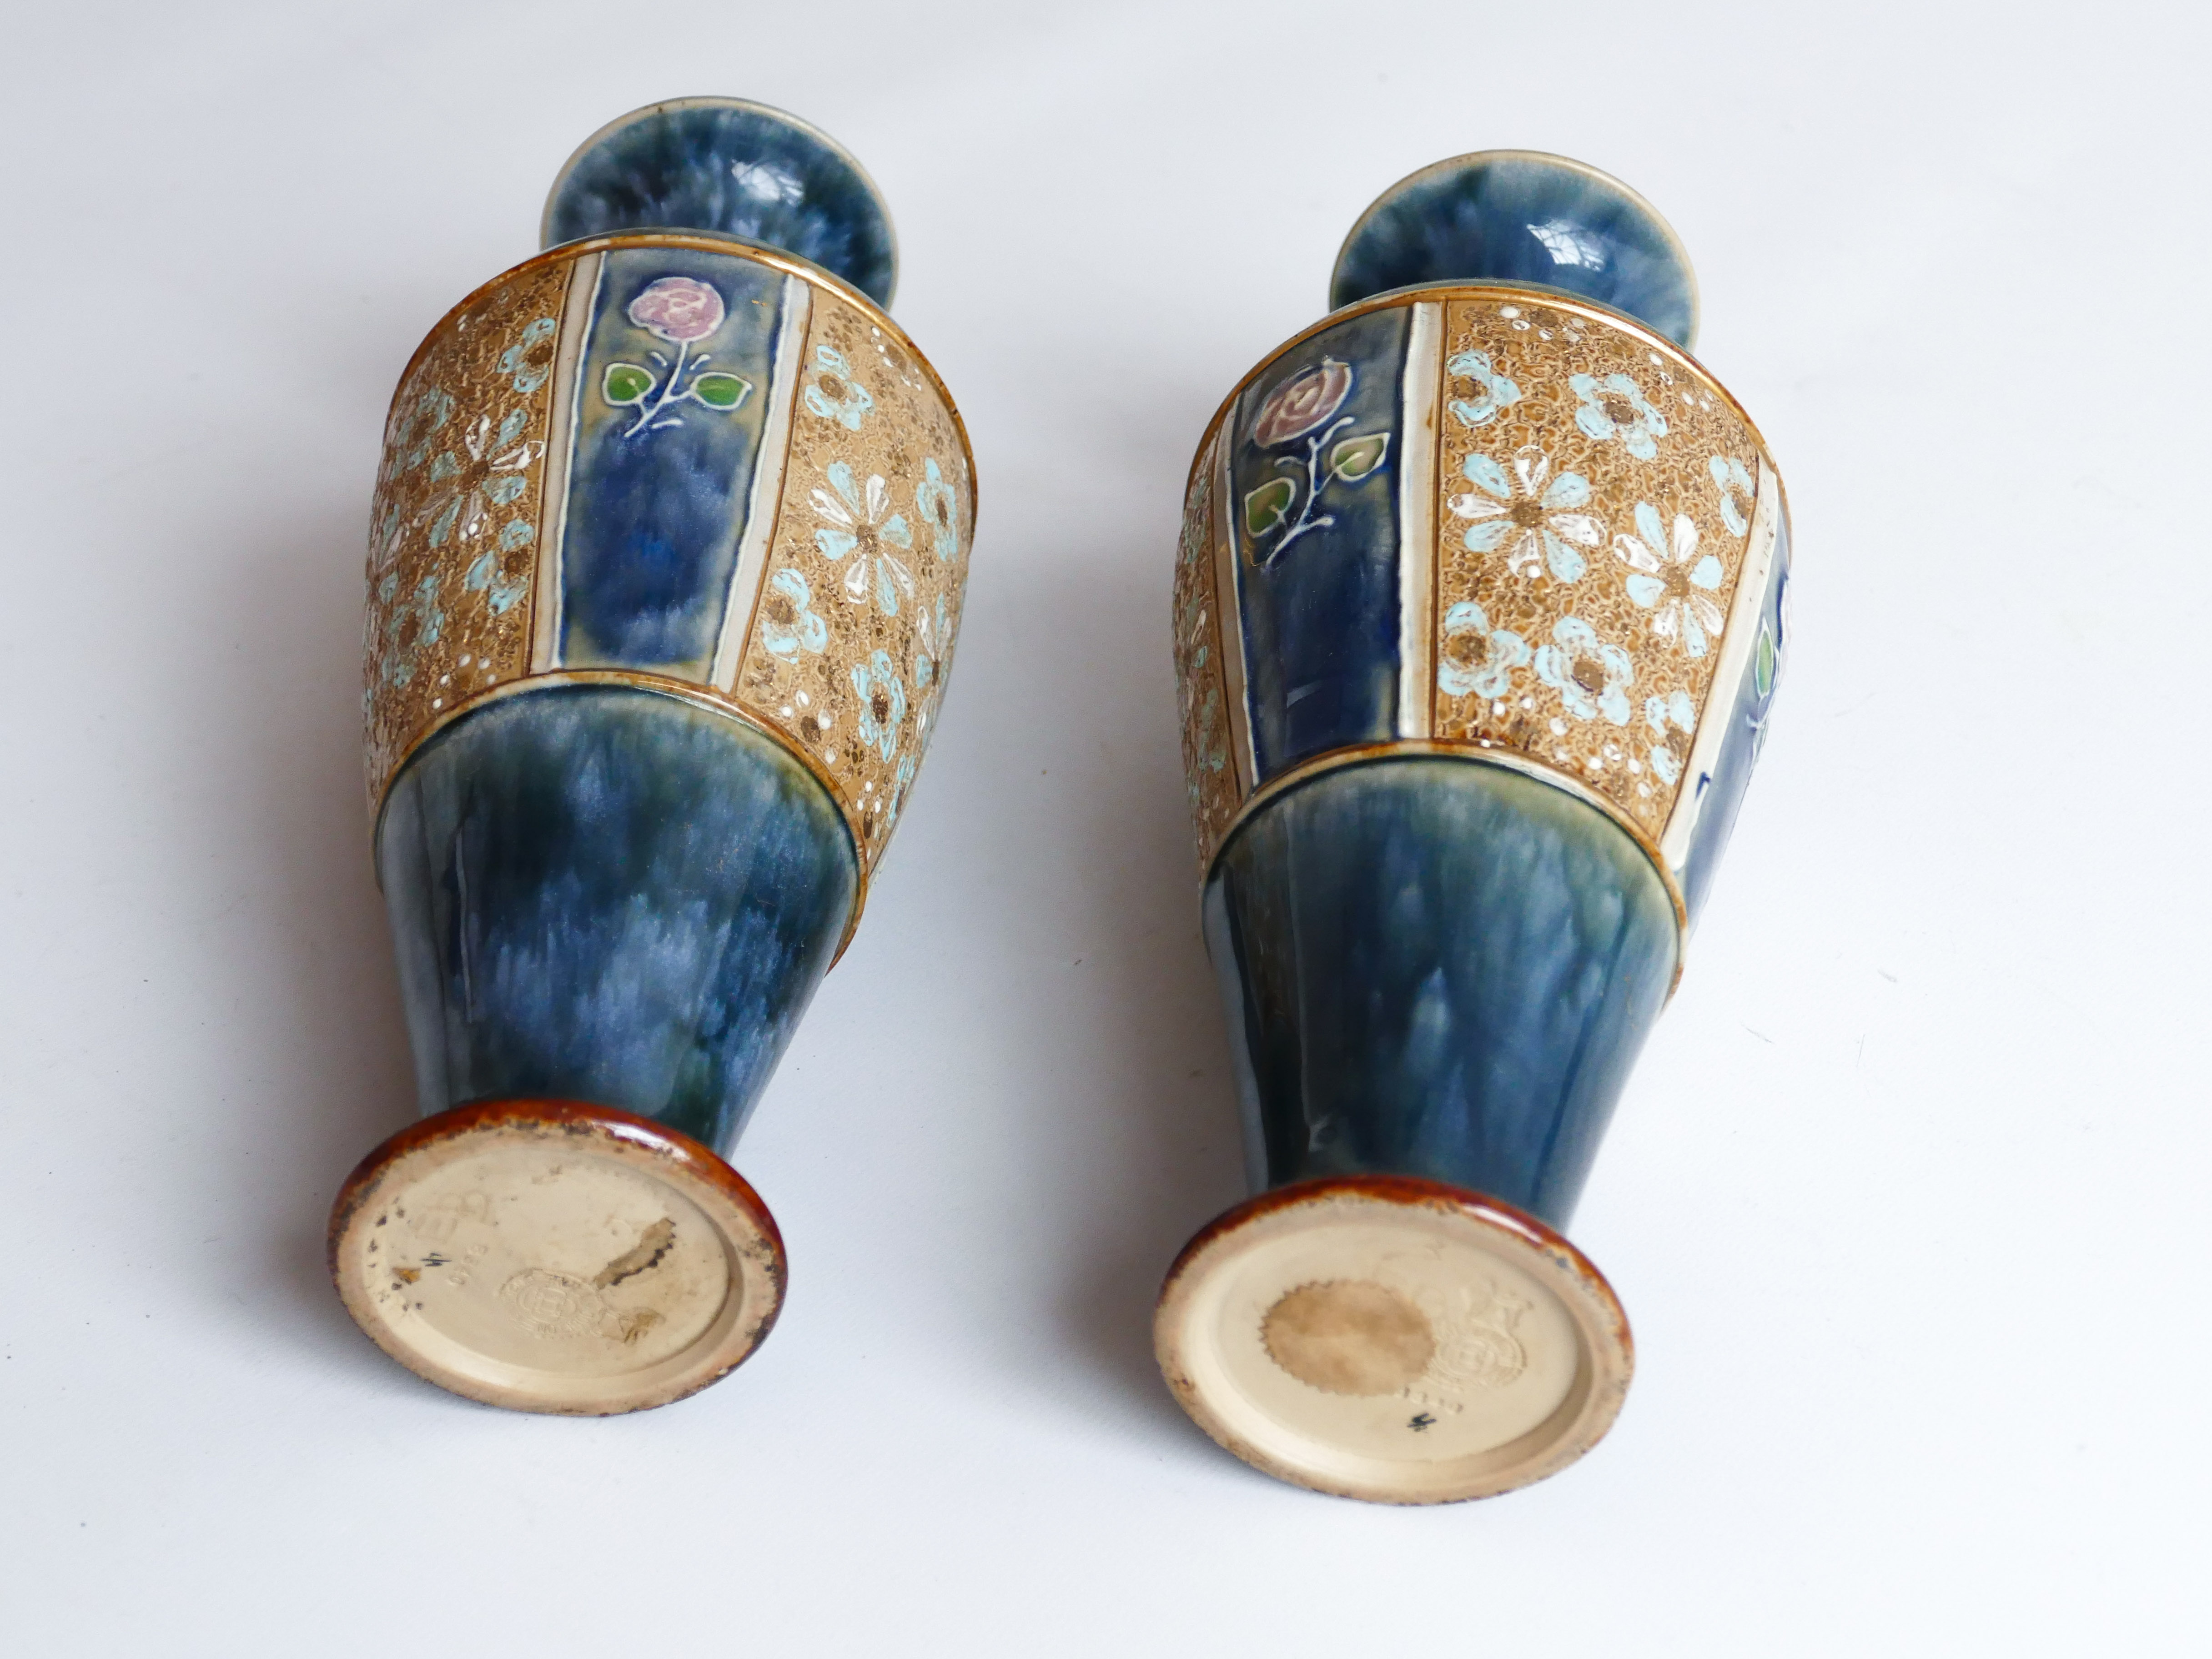 ROYAL DOULTON PAIR OF GLAZED ANTIQUE TAPESTRY VASES CHINA FLORAL MADE IN ENGLAND ART NOUVEAU LAMBETH - Image 3 of 4